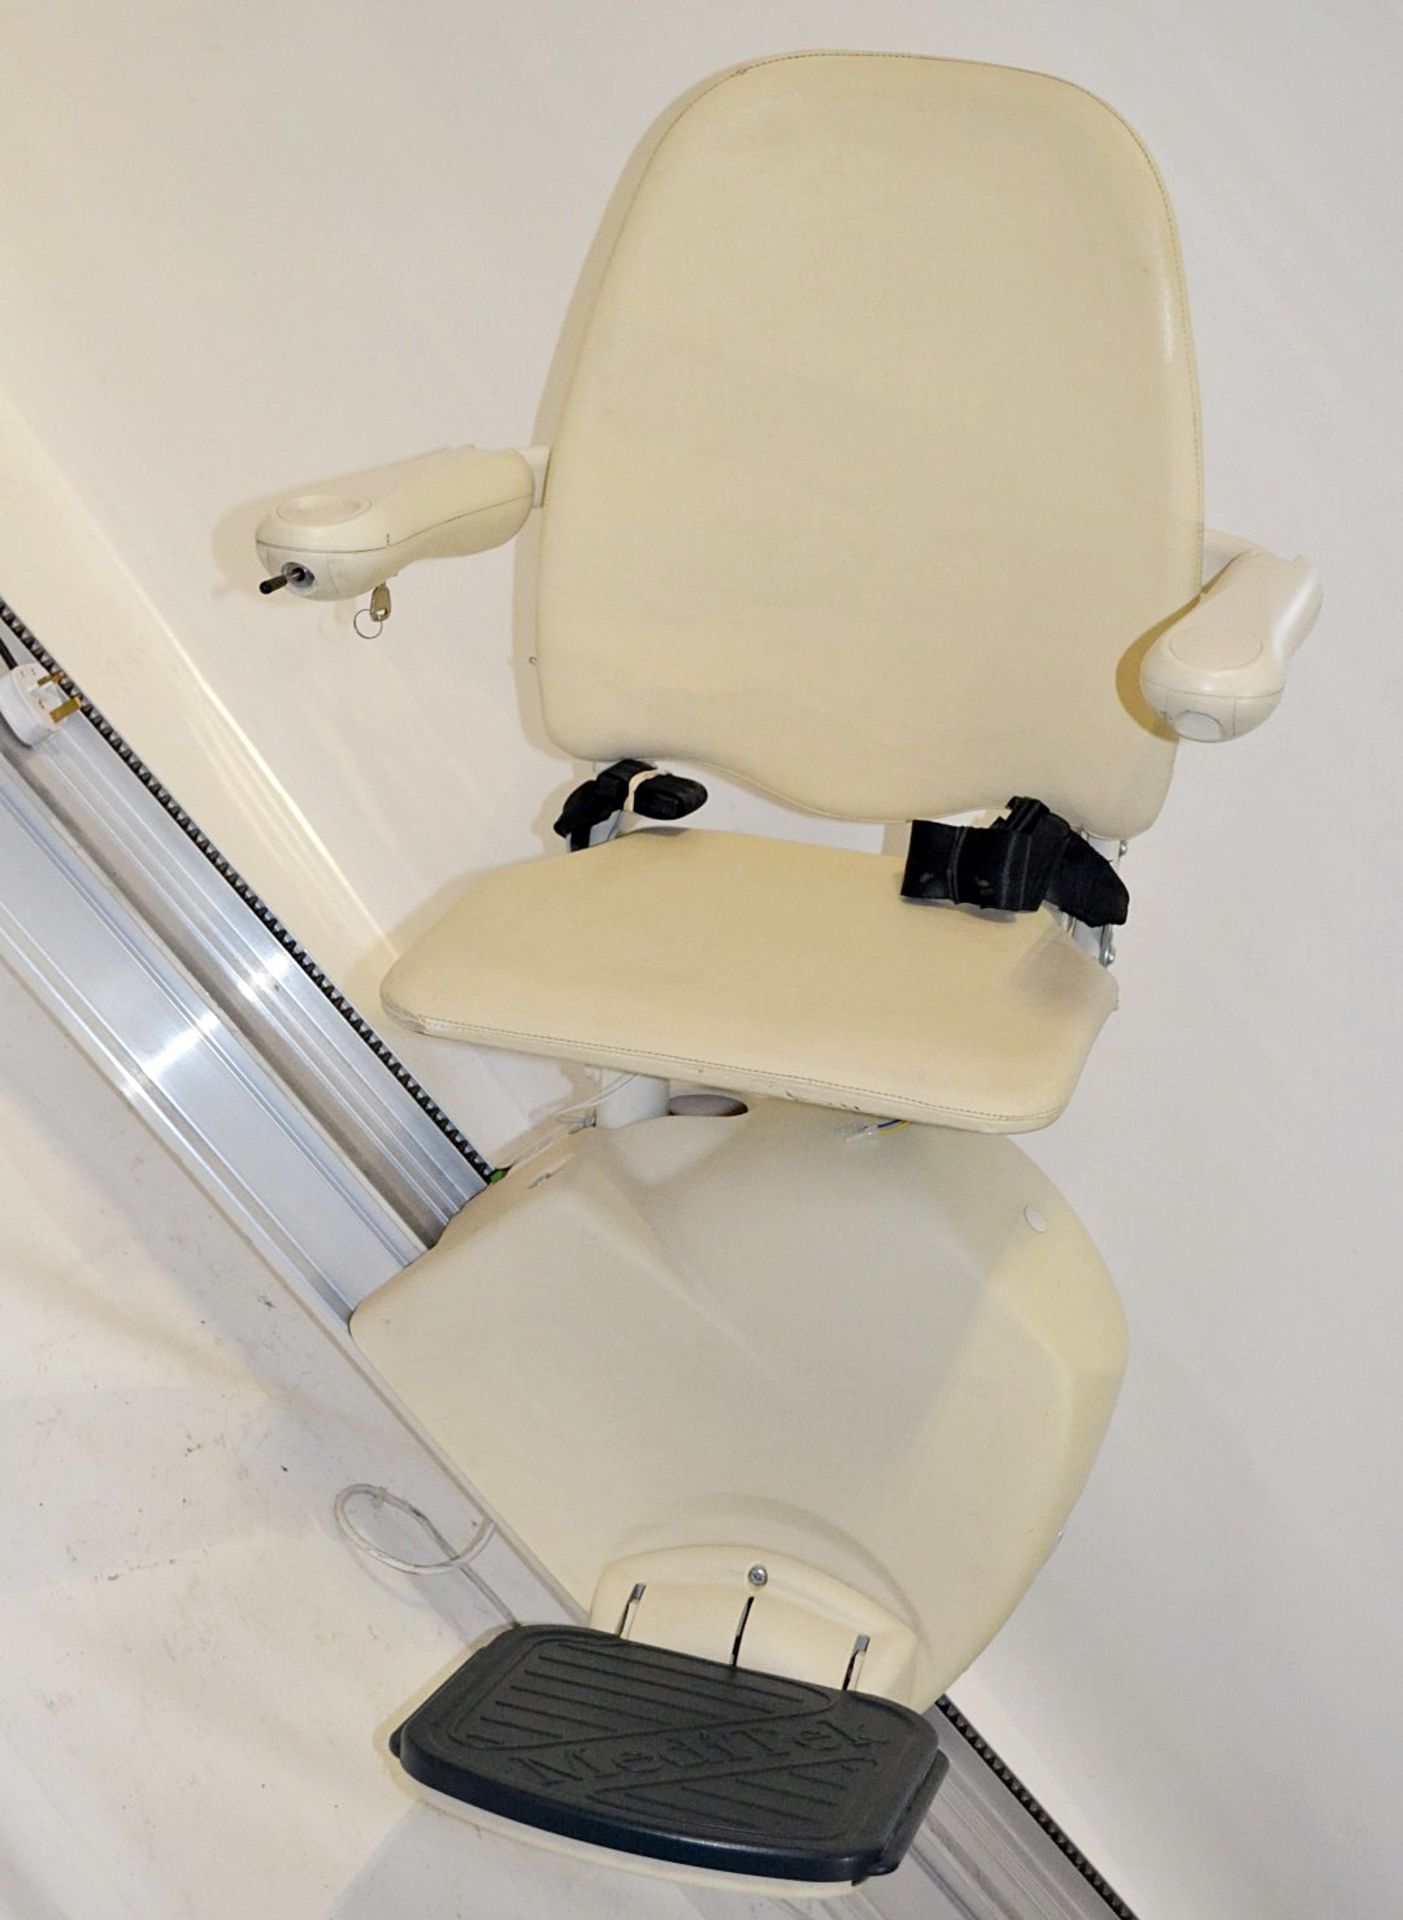 1 x Meditek D120 Deluxe Ascending Straight Stairlift With Powered Swivel Seat And Hinge Track - - Image 7 of 22